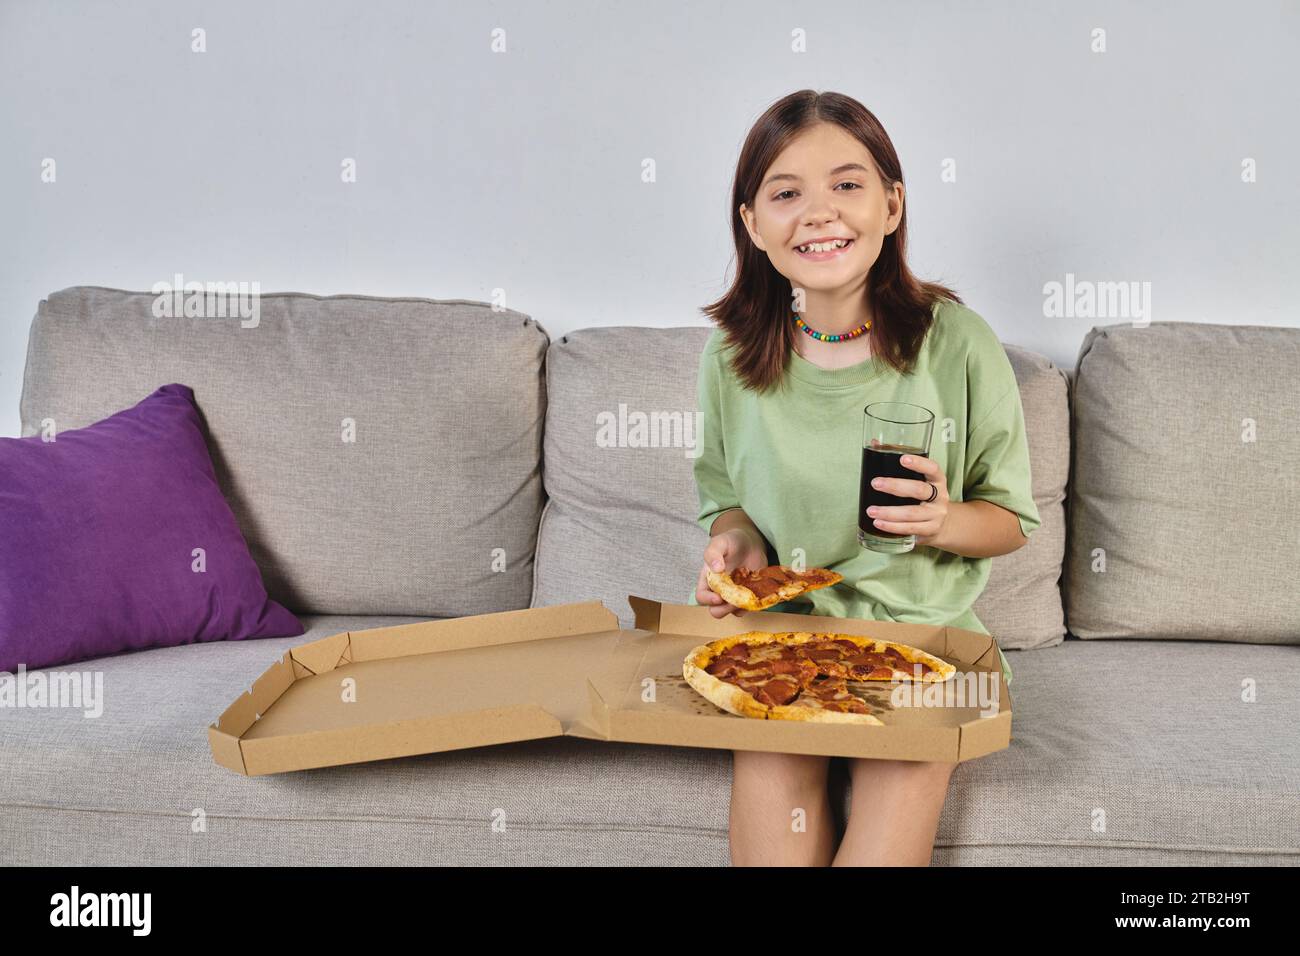 joyful teenage girl looking at camera while sitting on couch with pizza and soda, meal time Stock Photo